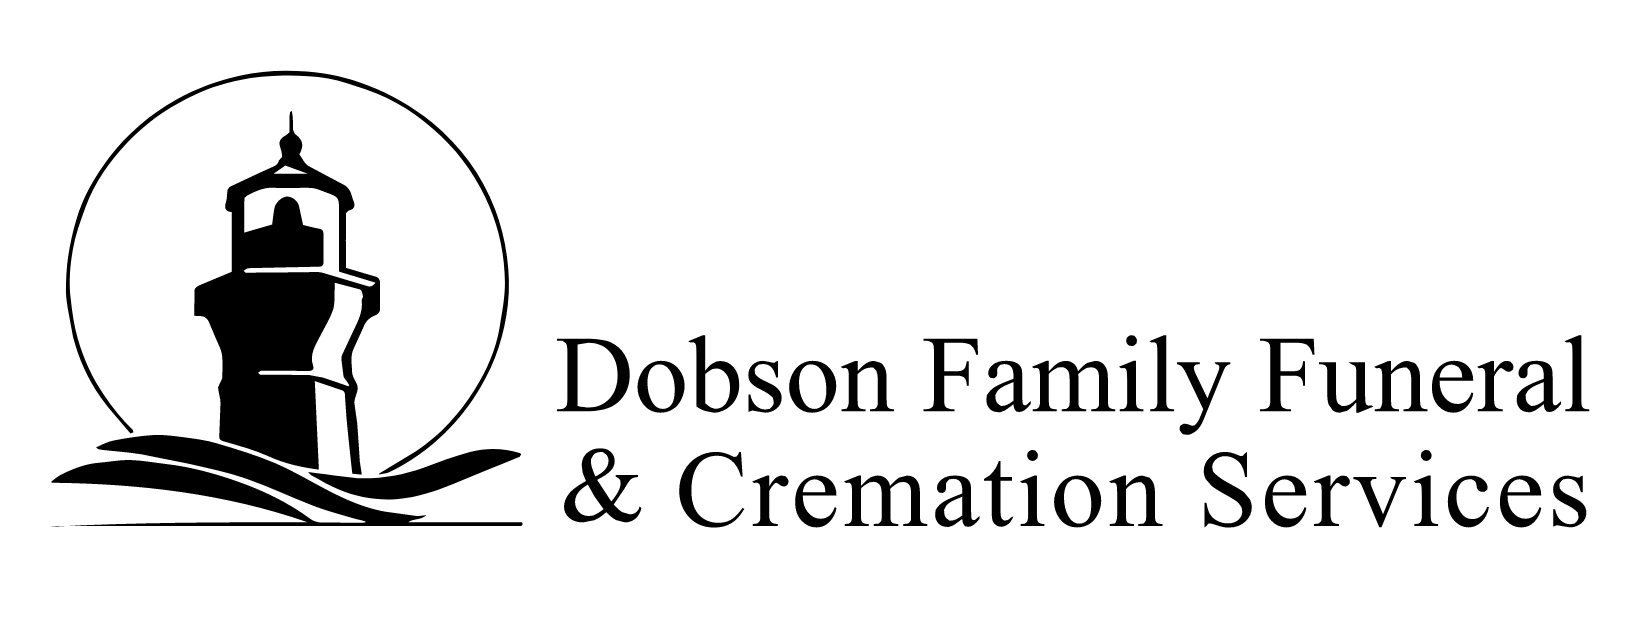 Dobson Family Funeral & Cremation Services Logo, black font with light house silhouette 